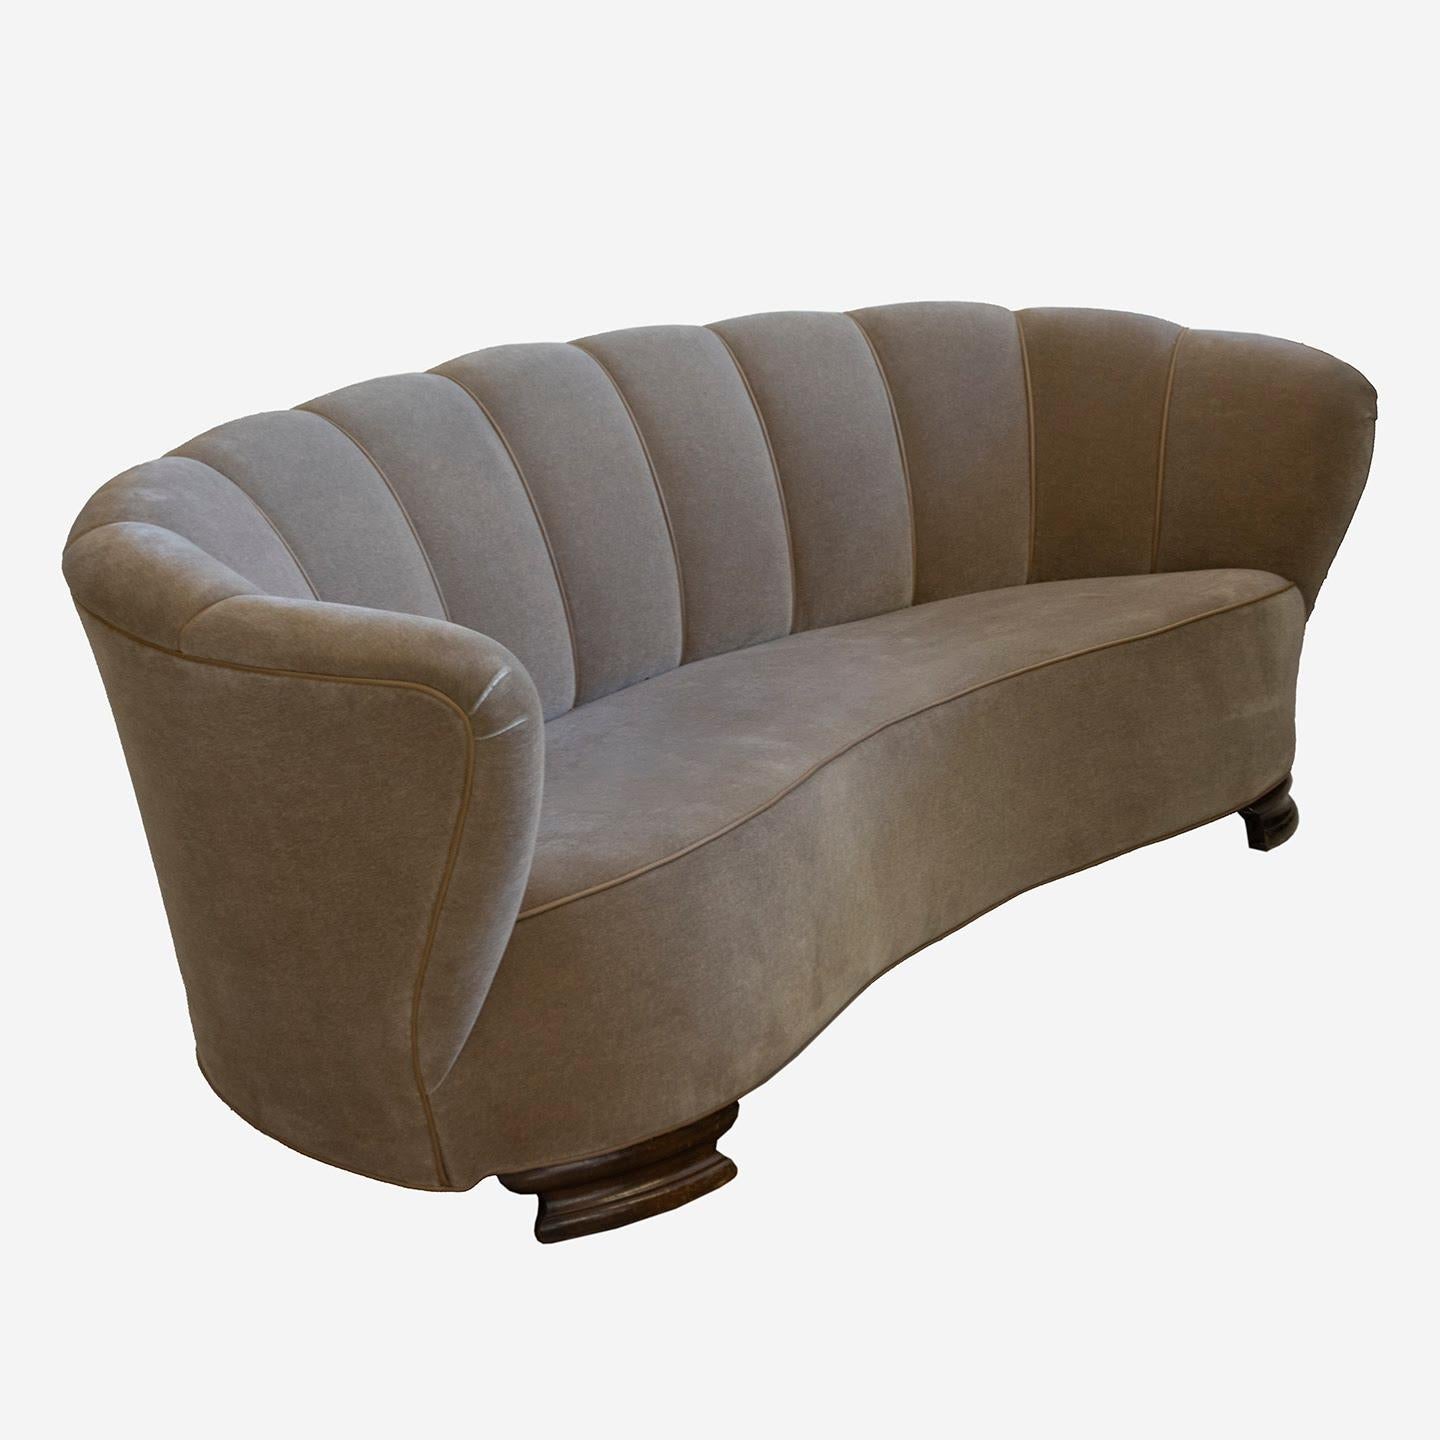 This outstanding Art Deco Danish banana sofa from the 1930s is upholstered in imported mohair fabric. The vertical stitching with leather piping on the backseat highlights the rounded shape of the sofa. Front rounded wood legs further enhance the